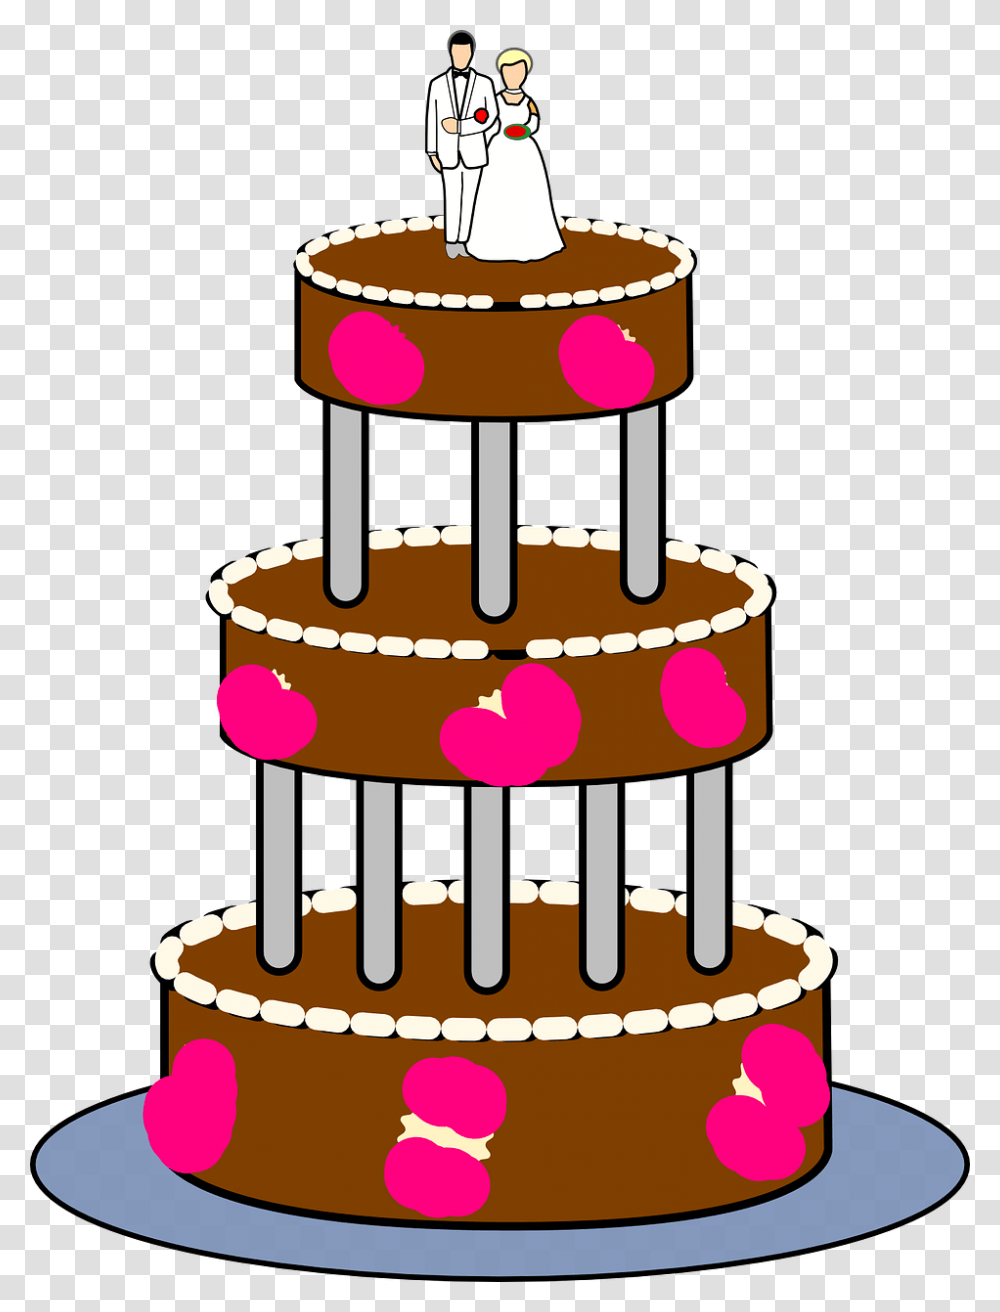 Wedding Cake Tiered Layers Topper Columns Frosting Wedding Cake Graphic, Birthday Cake, Dessert, Food, Circus Transparent Png